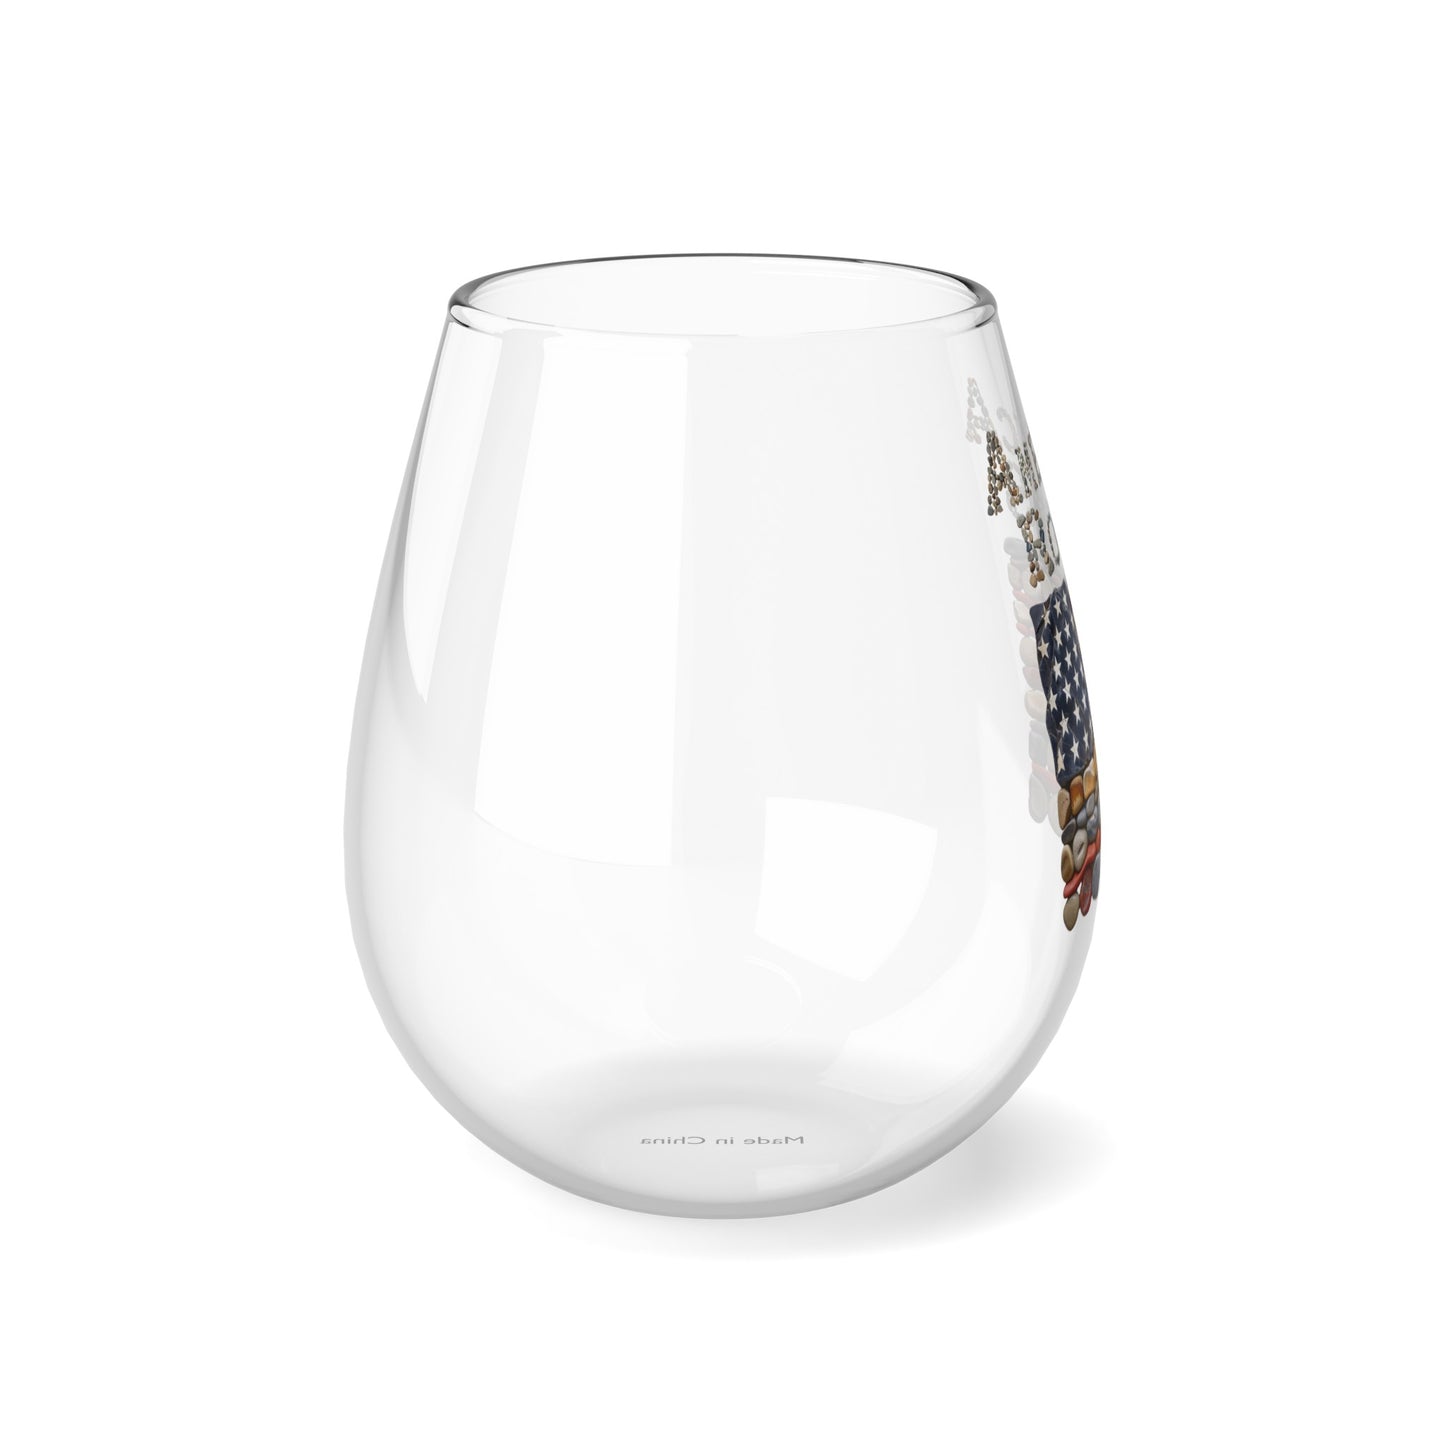 Stemless Wine Glasses with American Flag Rock Design, 11.75 oz, Three variations available